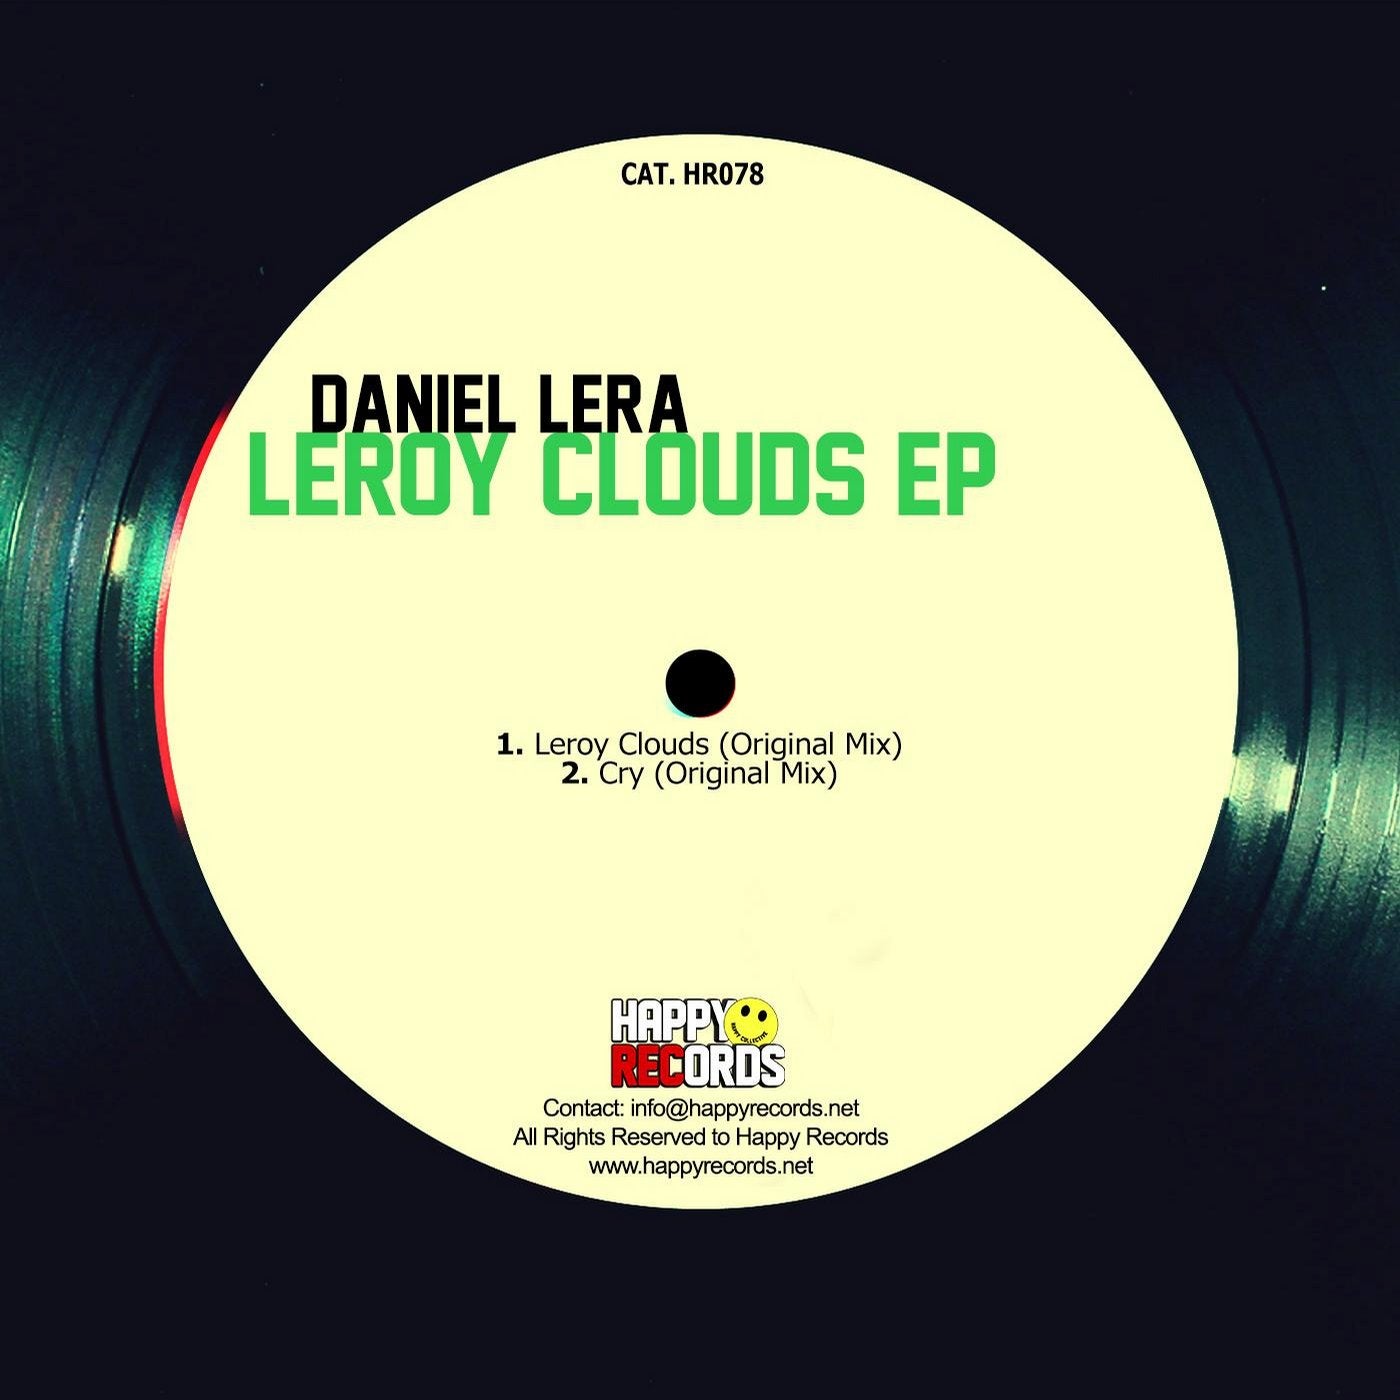 Leroy Clouds EP